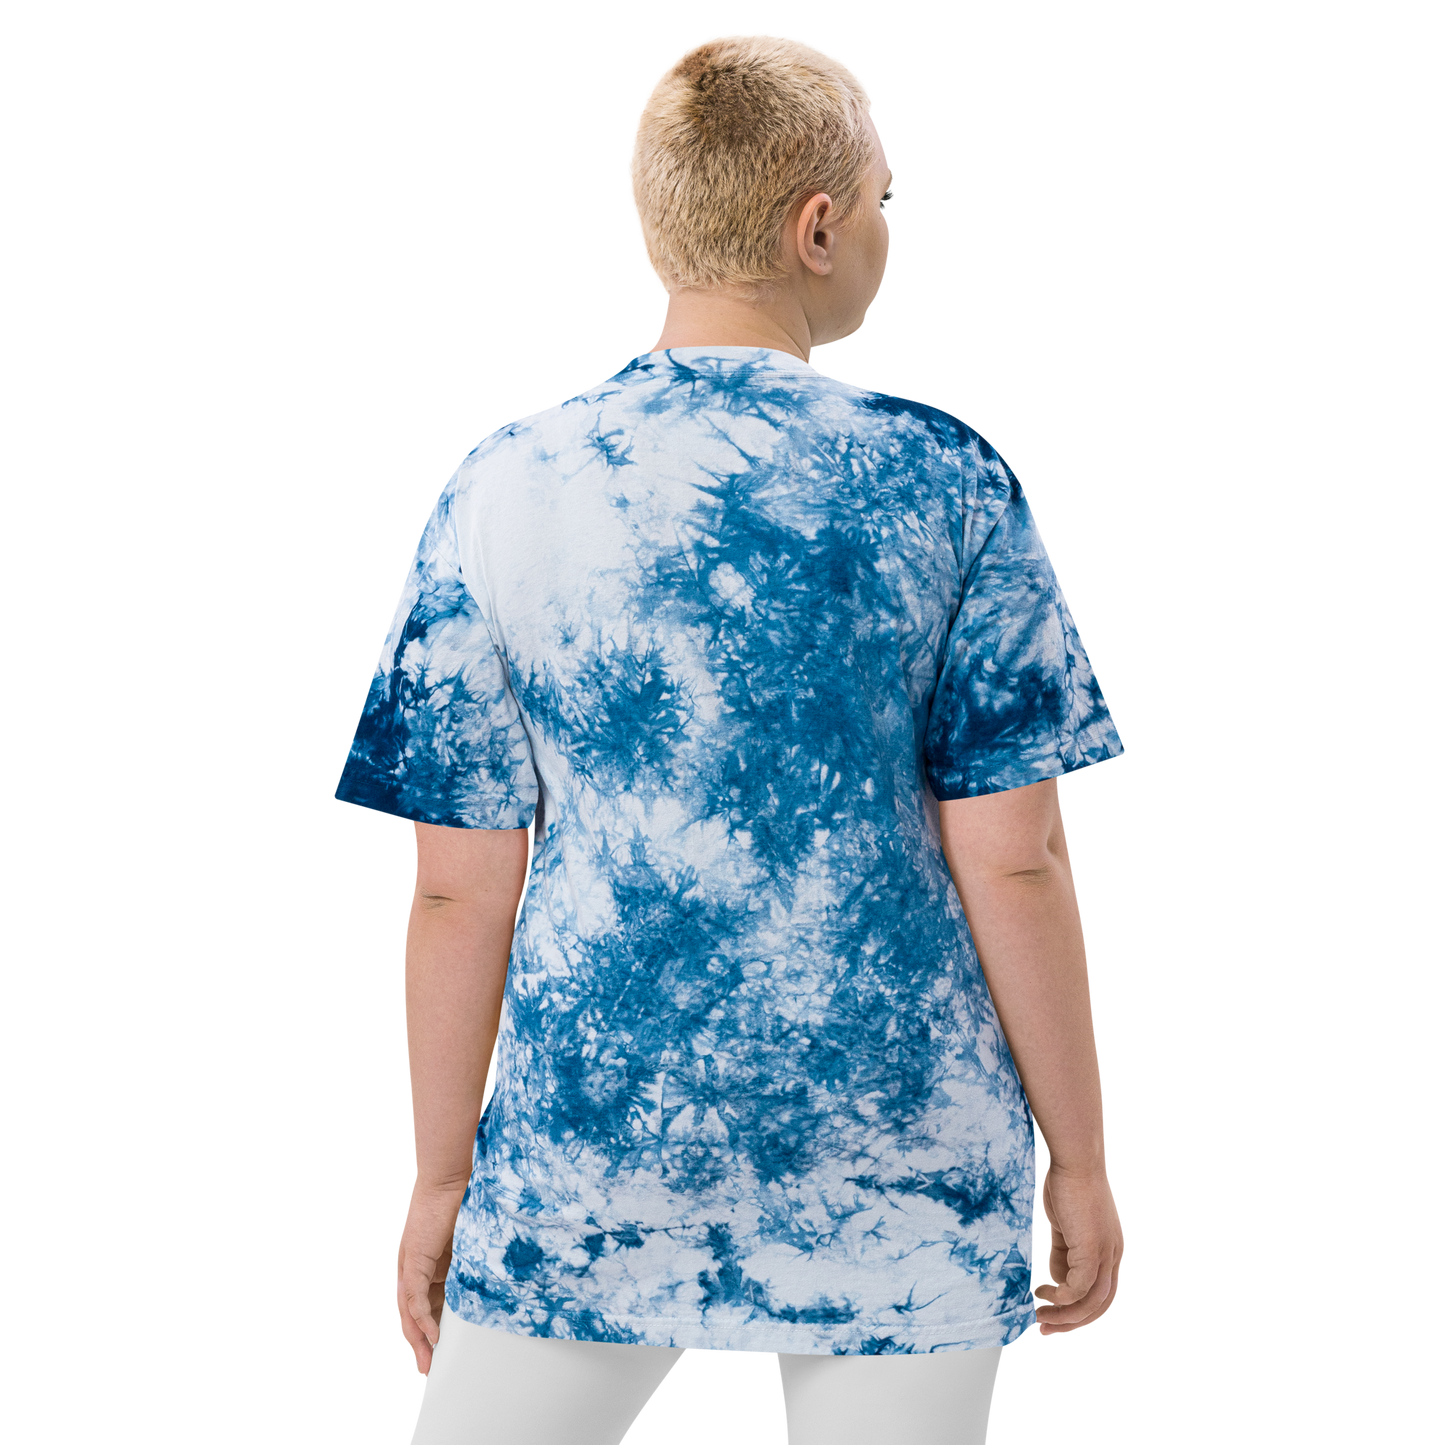 Crossed-X Oversized Tie-Dye T-Shirt • YQB Quebec City • YHM Designs - Image 09